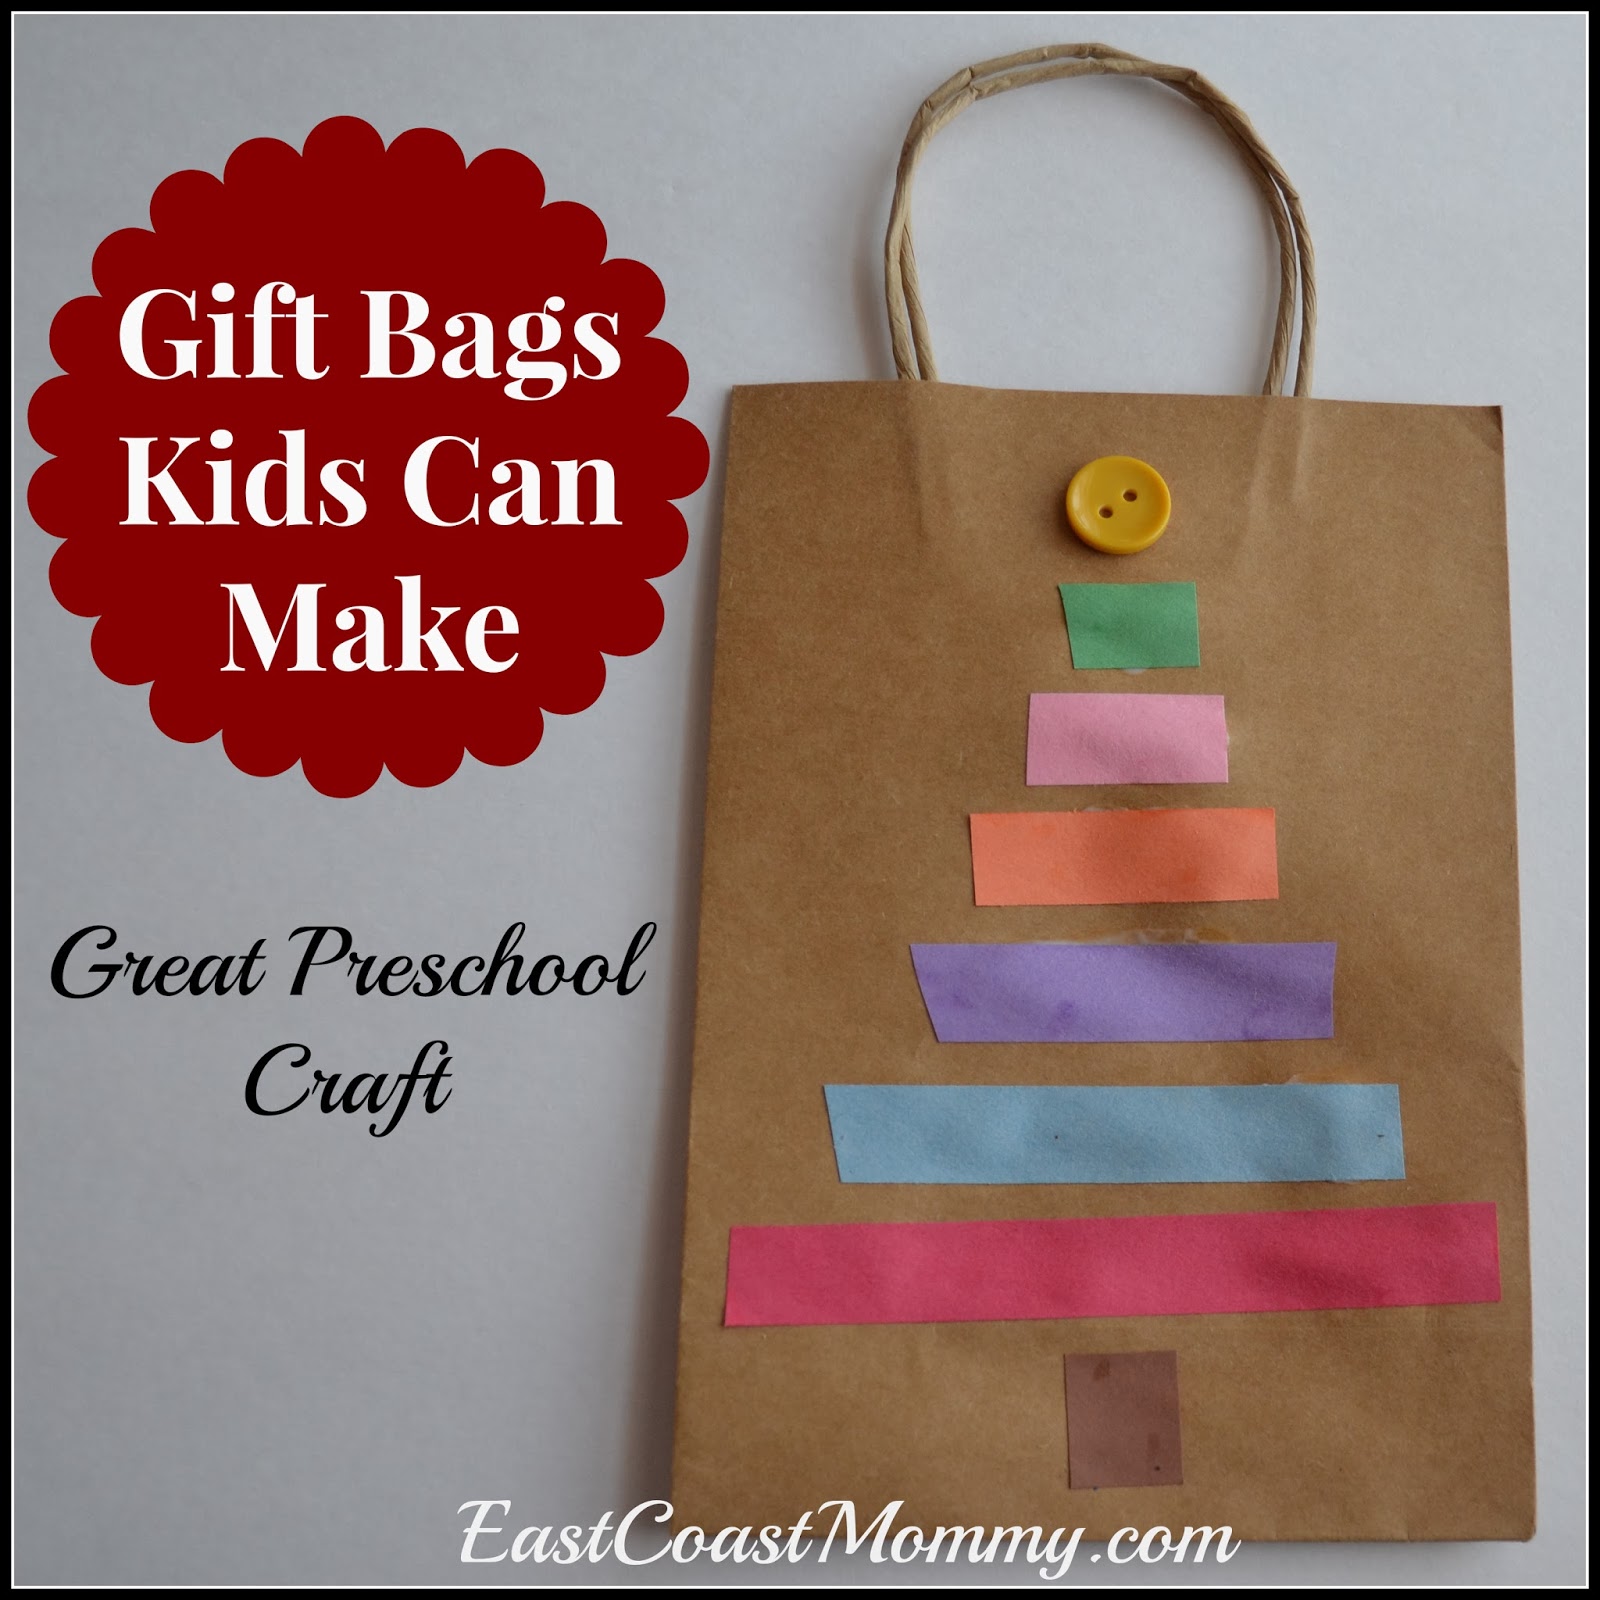 East Coast Mommy: Gift Bags Kids Can Make